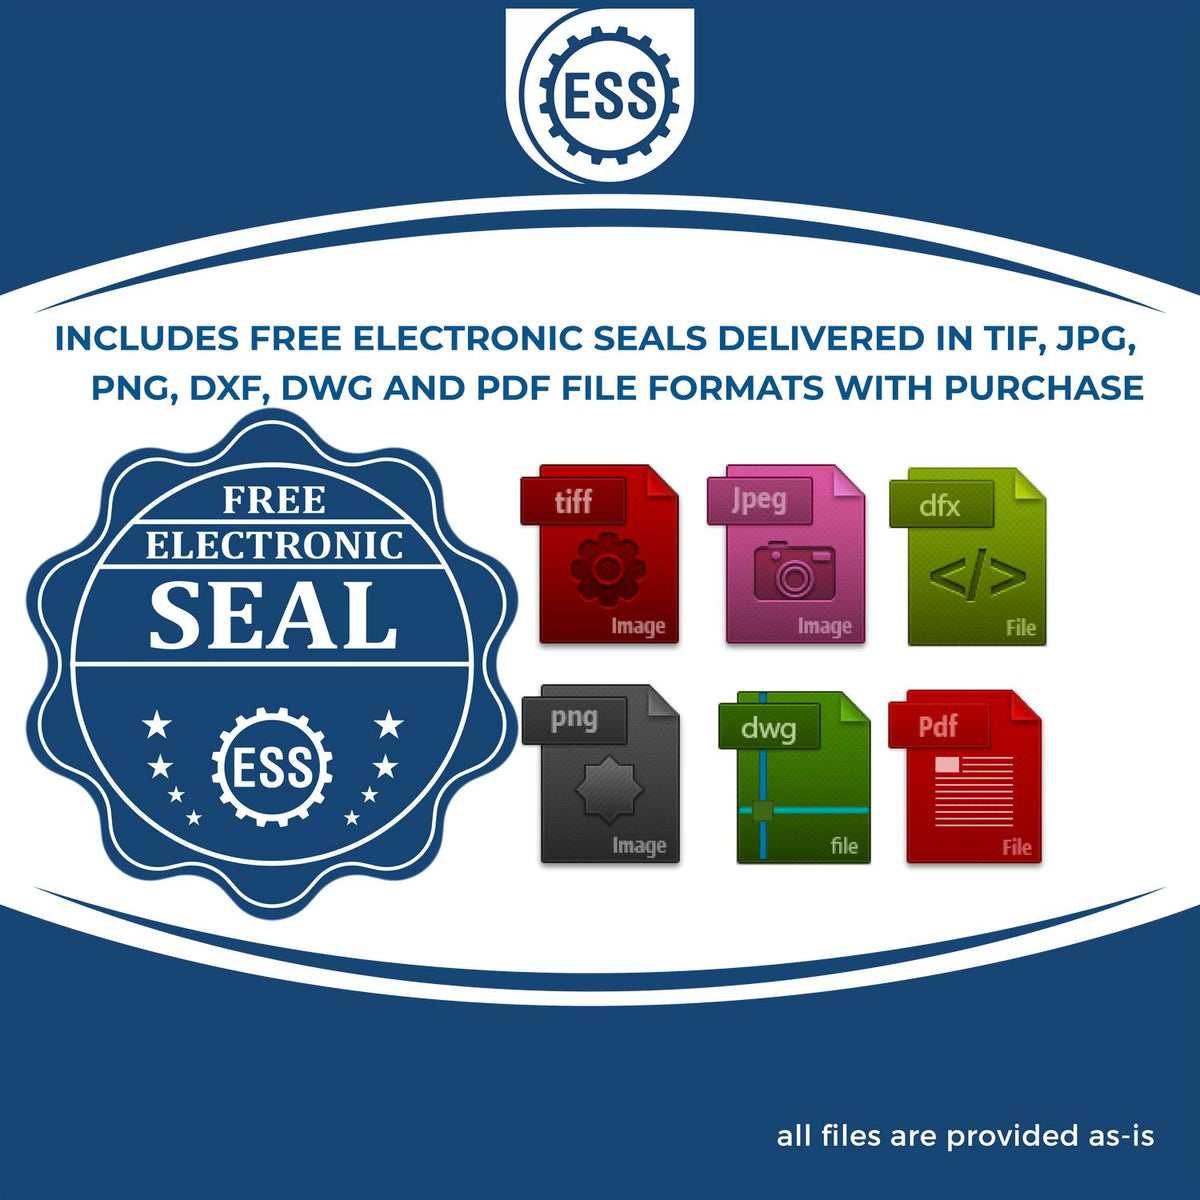 An infographic for the free electronic seal for the Heavy Duty Cast Iron Minnesota Land Surveyor Seal Embosser illustrating the different file type icons such as DXF, DWG, TIF, JPG and PNG.